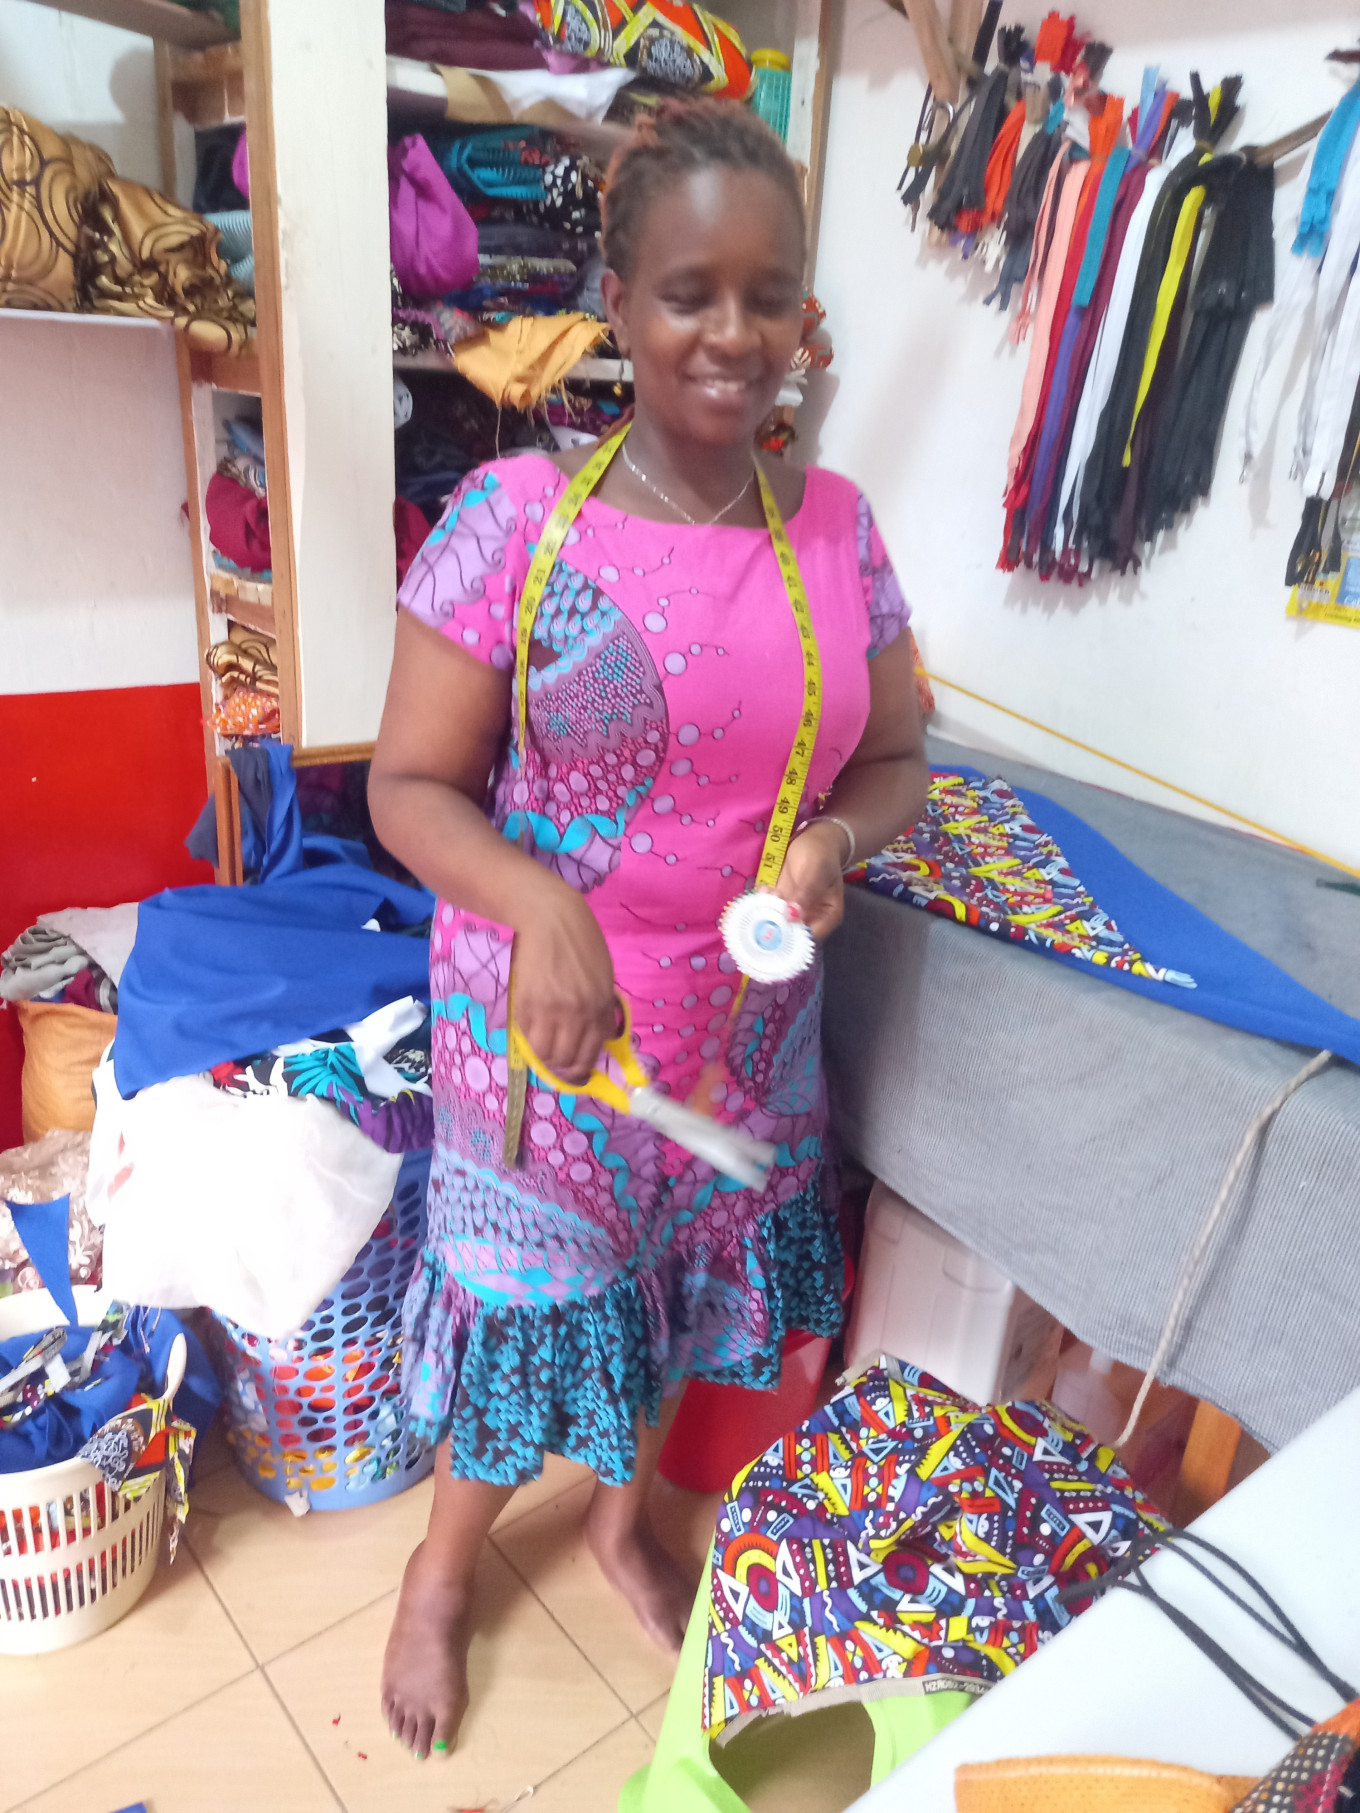 Zidisha  To help buy thread & material for sewing business